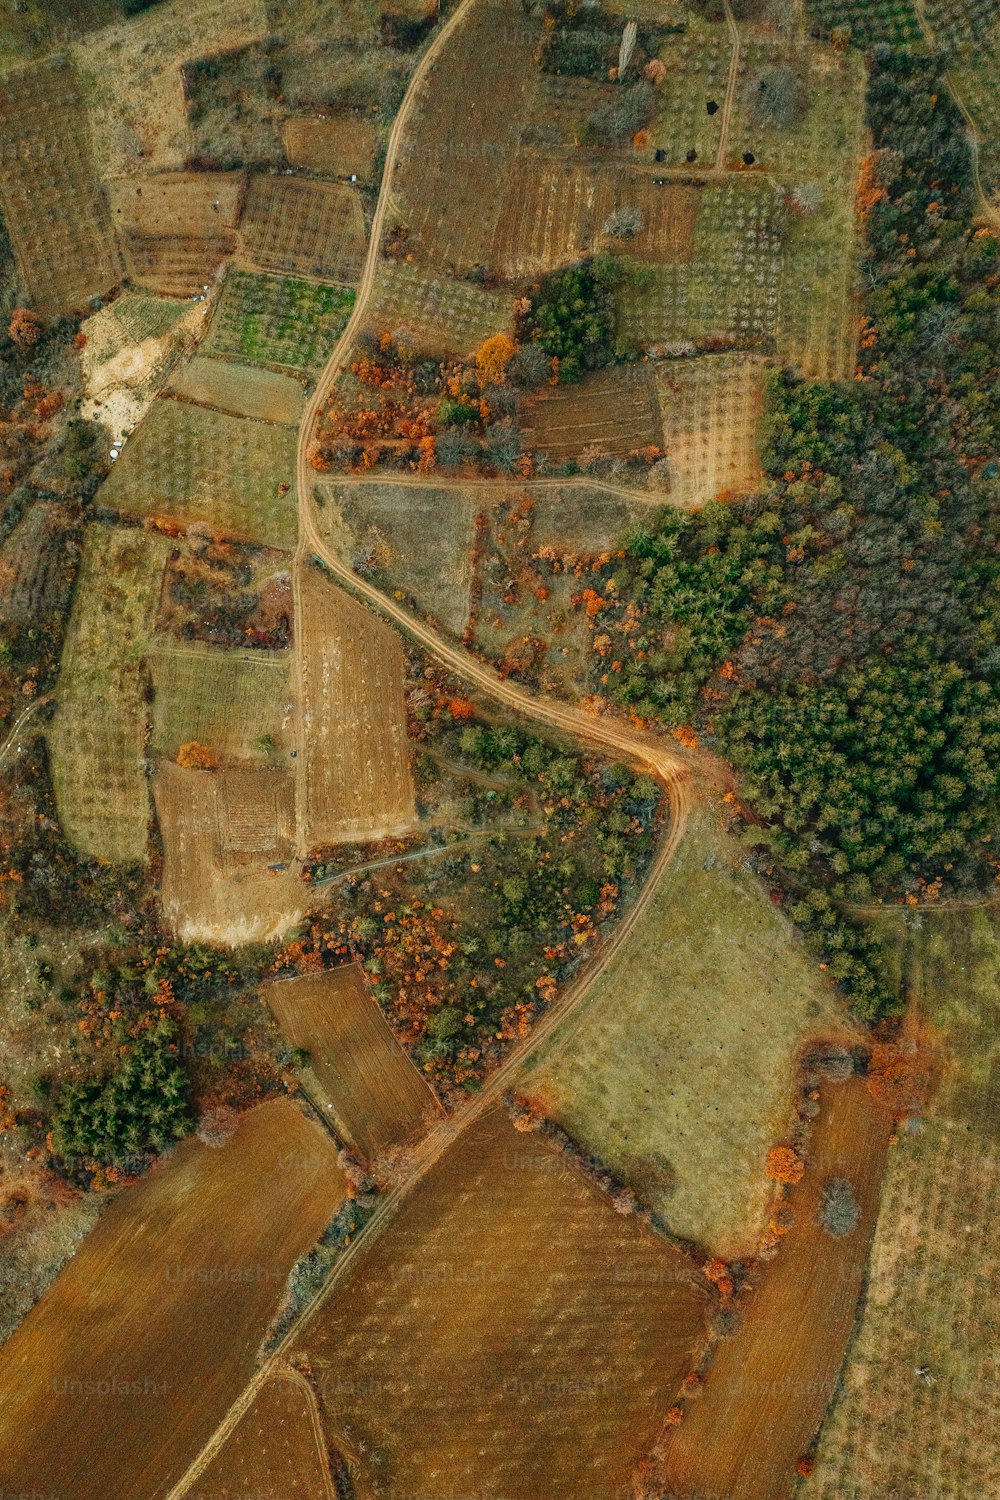 an aerial view of a rural area with lots of trees